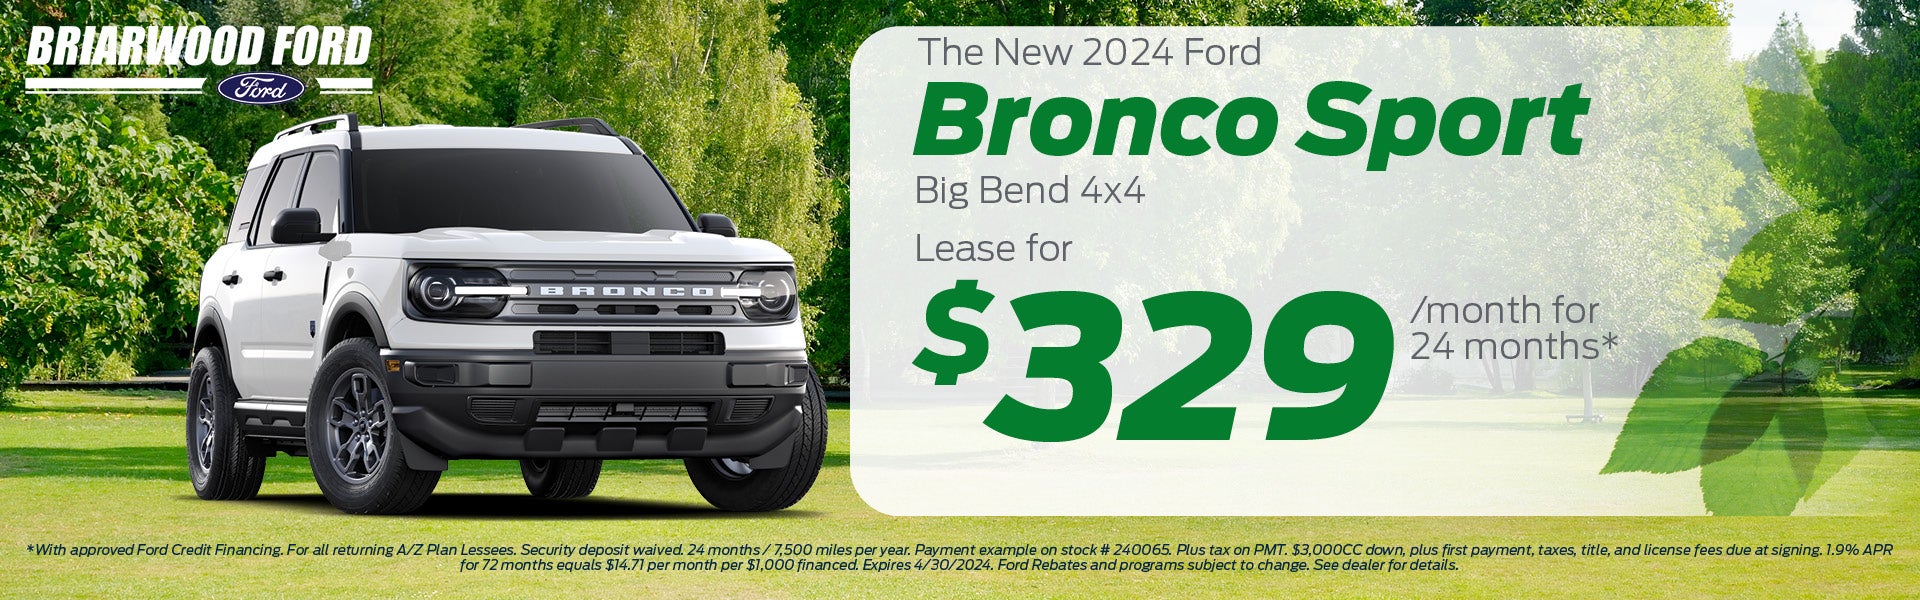 2024 Ford Bronco Sport Lease Offer